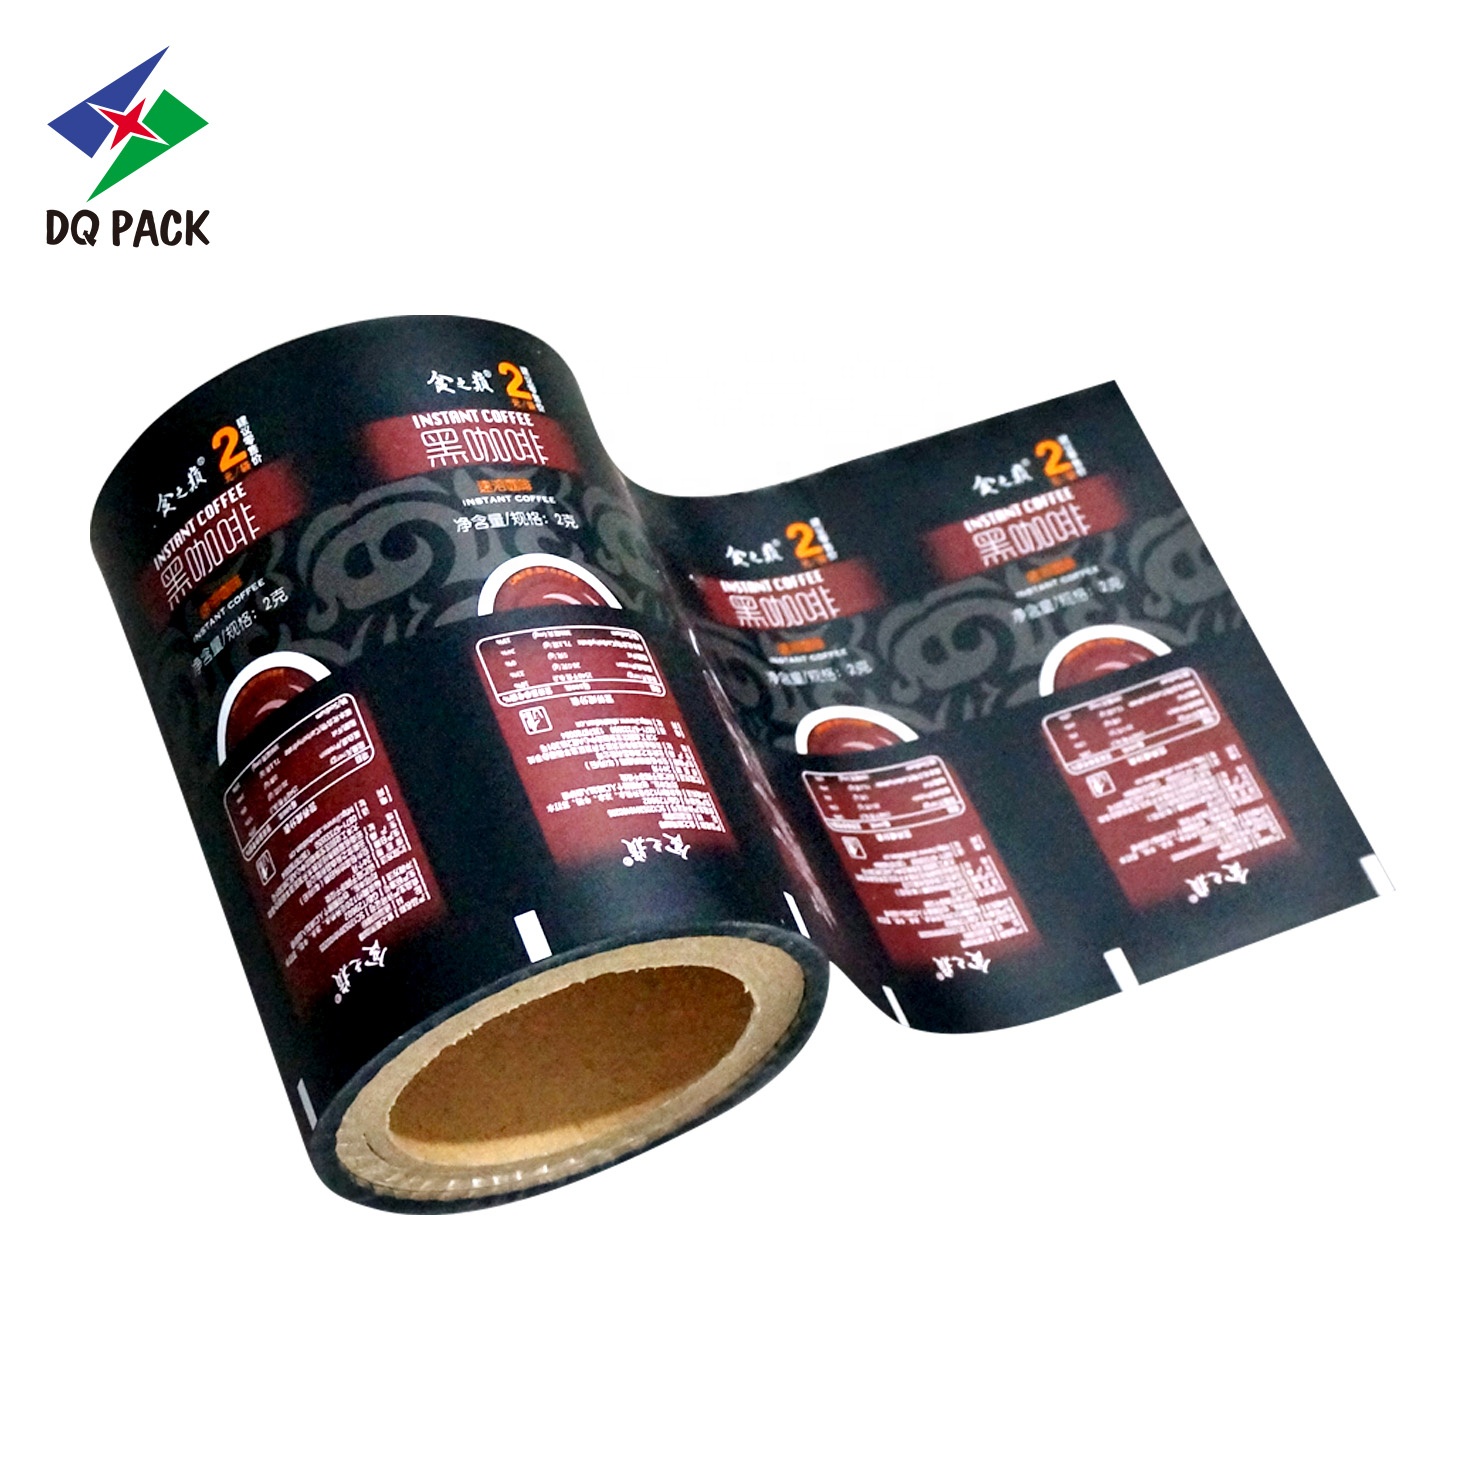 DQ PACK Coffee Powder food Packaging Roll Stock Film Metallized Laminated Material Film